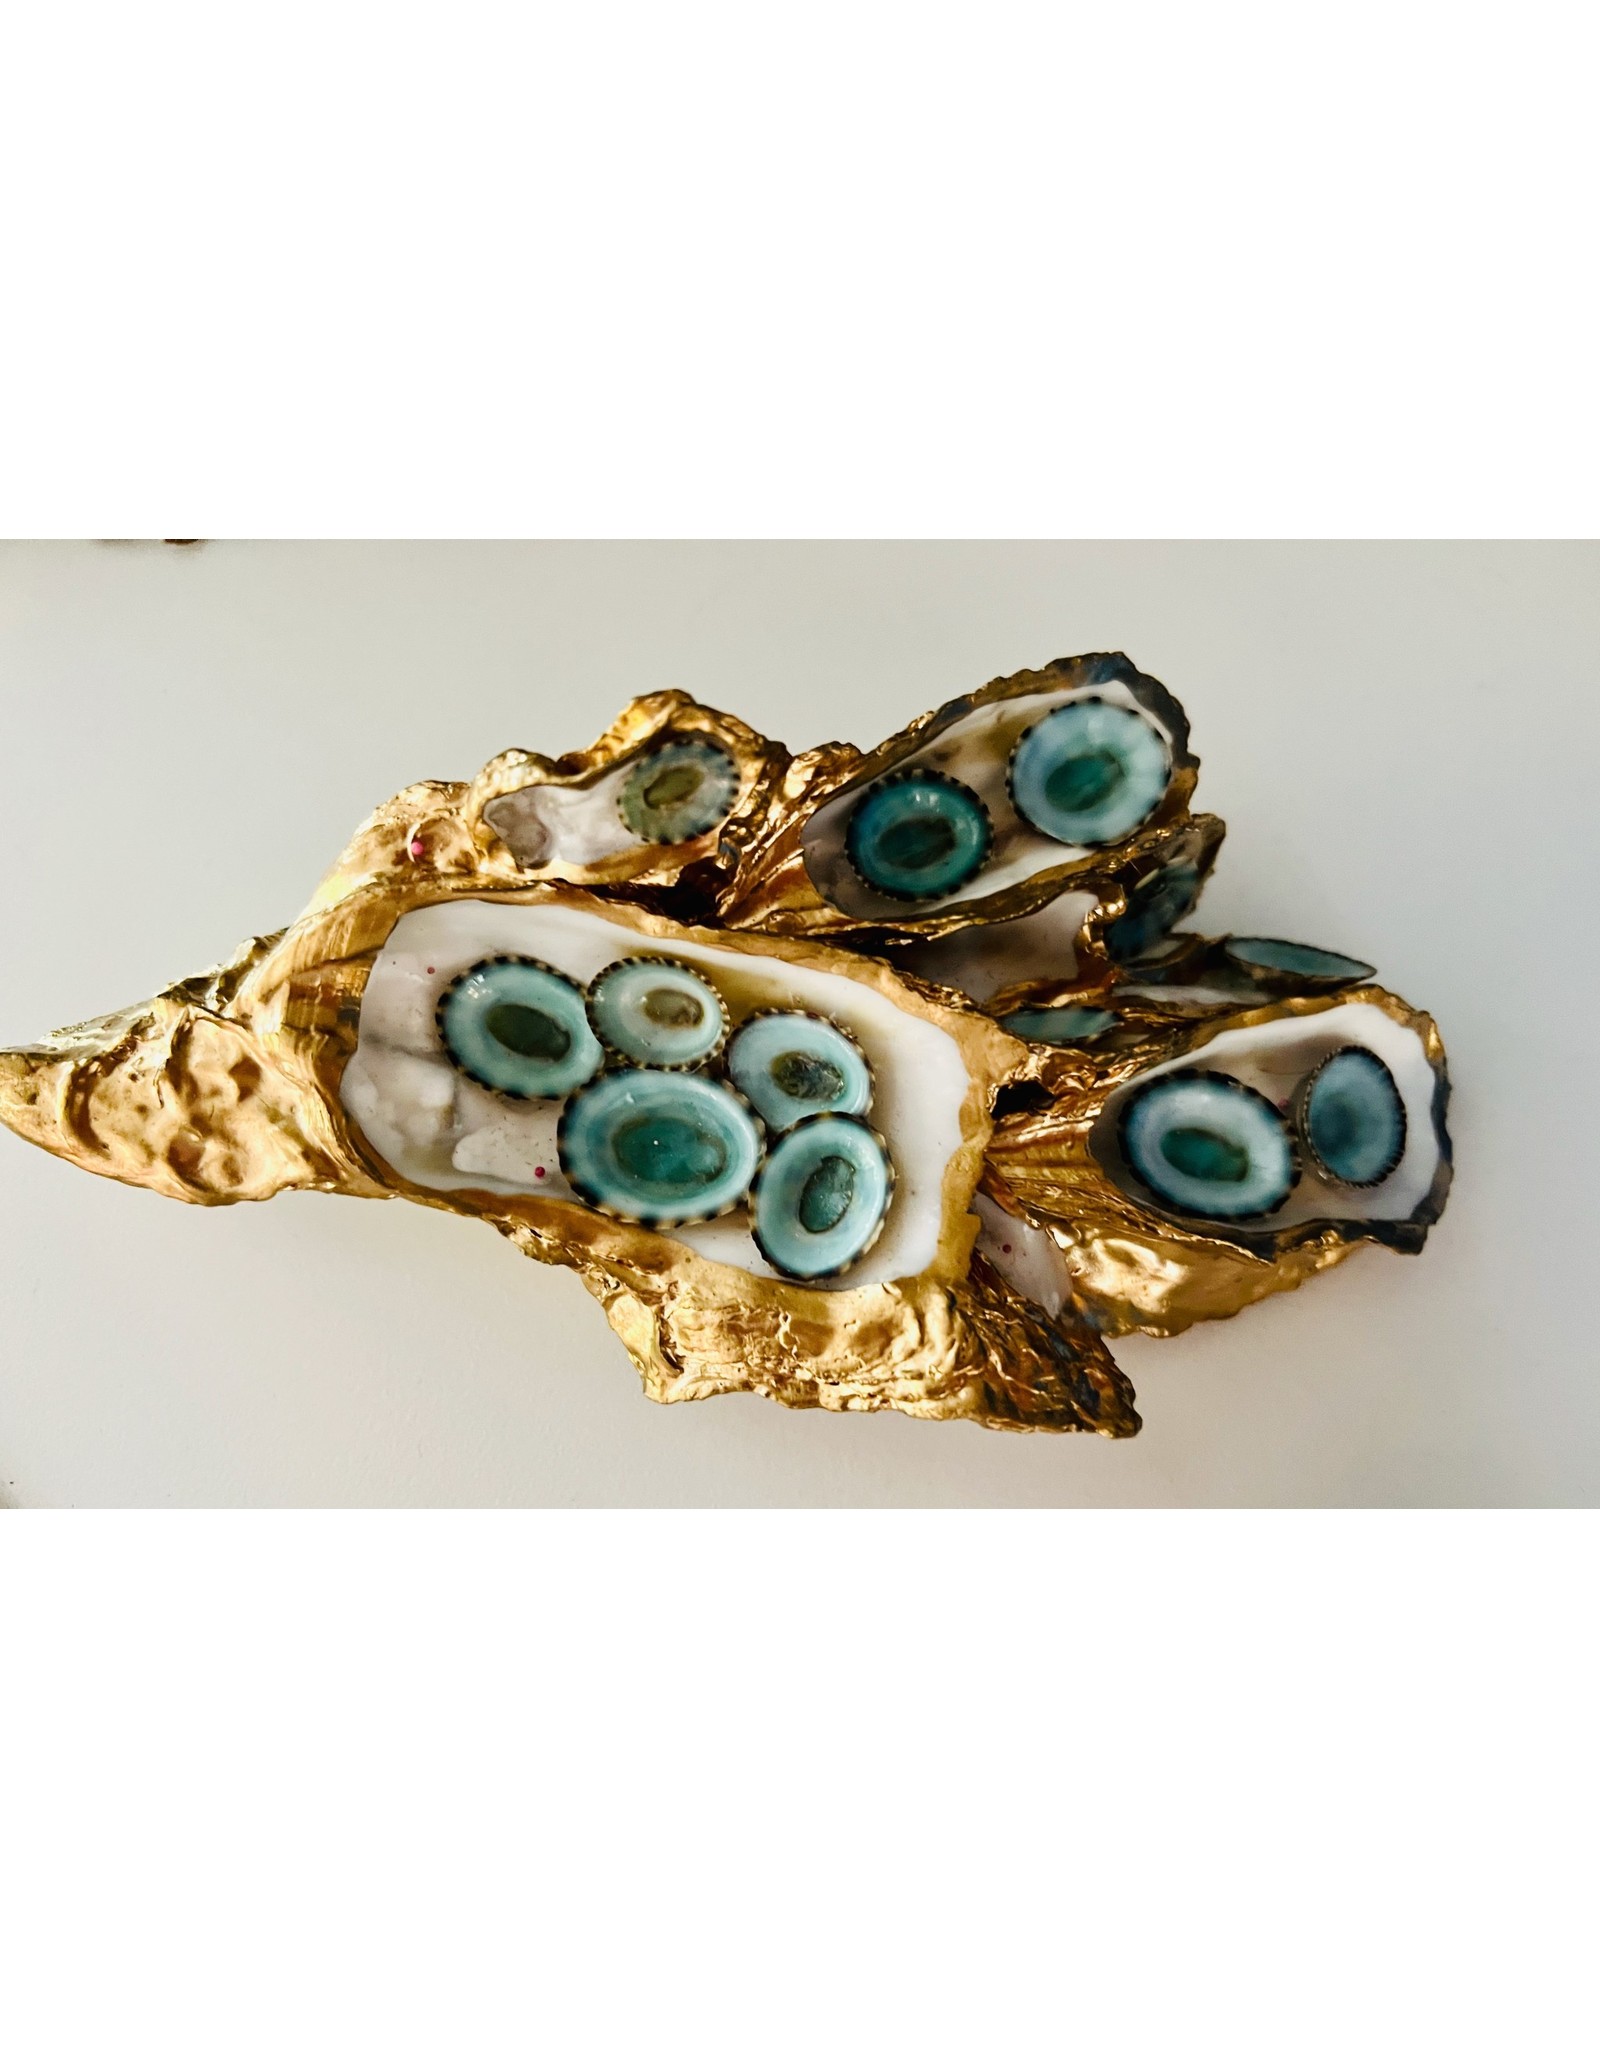 Pam Maschal Gold Leaf Wild Oyster cluster w/lturquoise Mexican limpets, PAMM